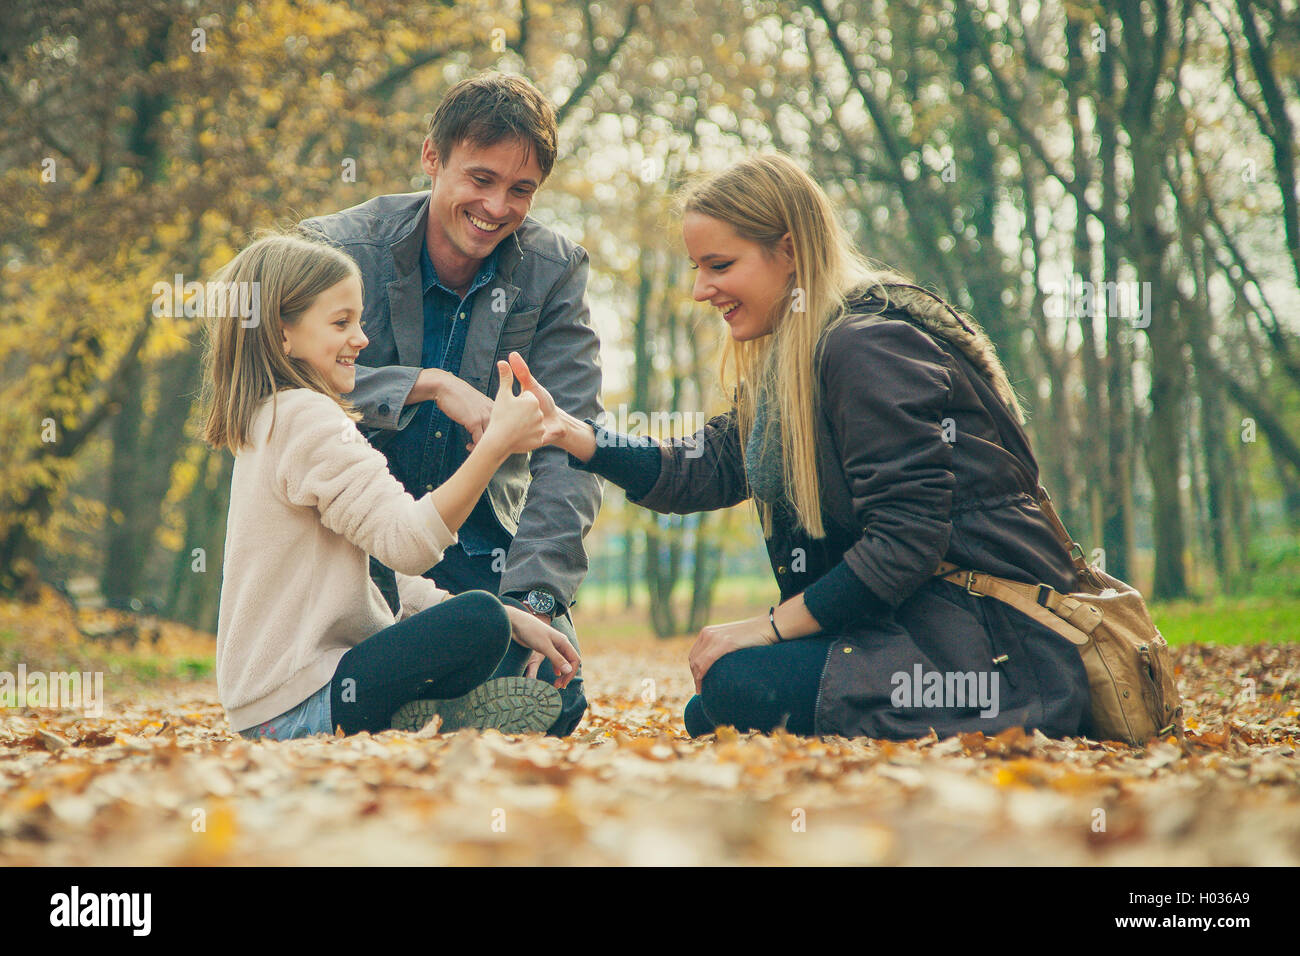 Family of three kneel in park on an autumn day. Stock Photo